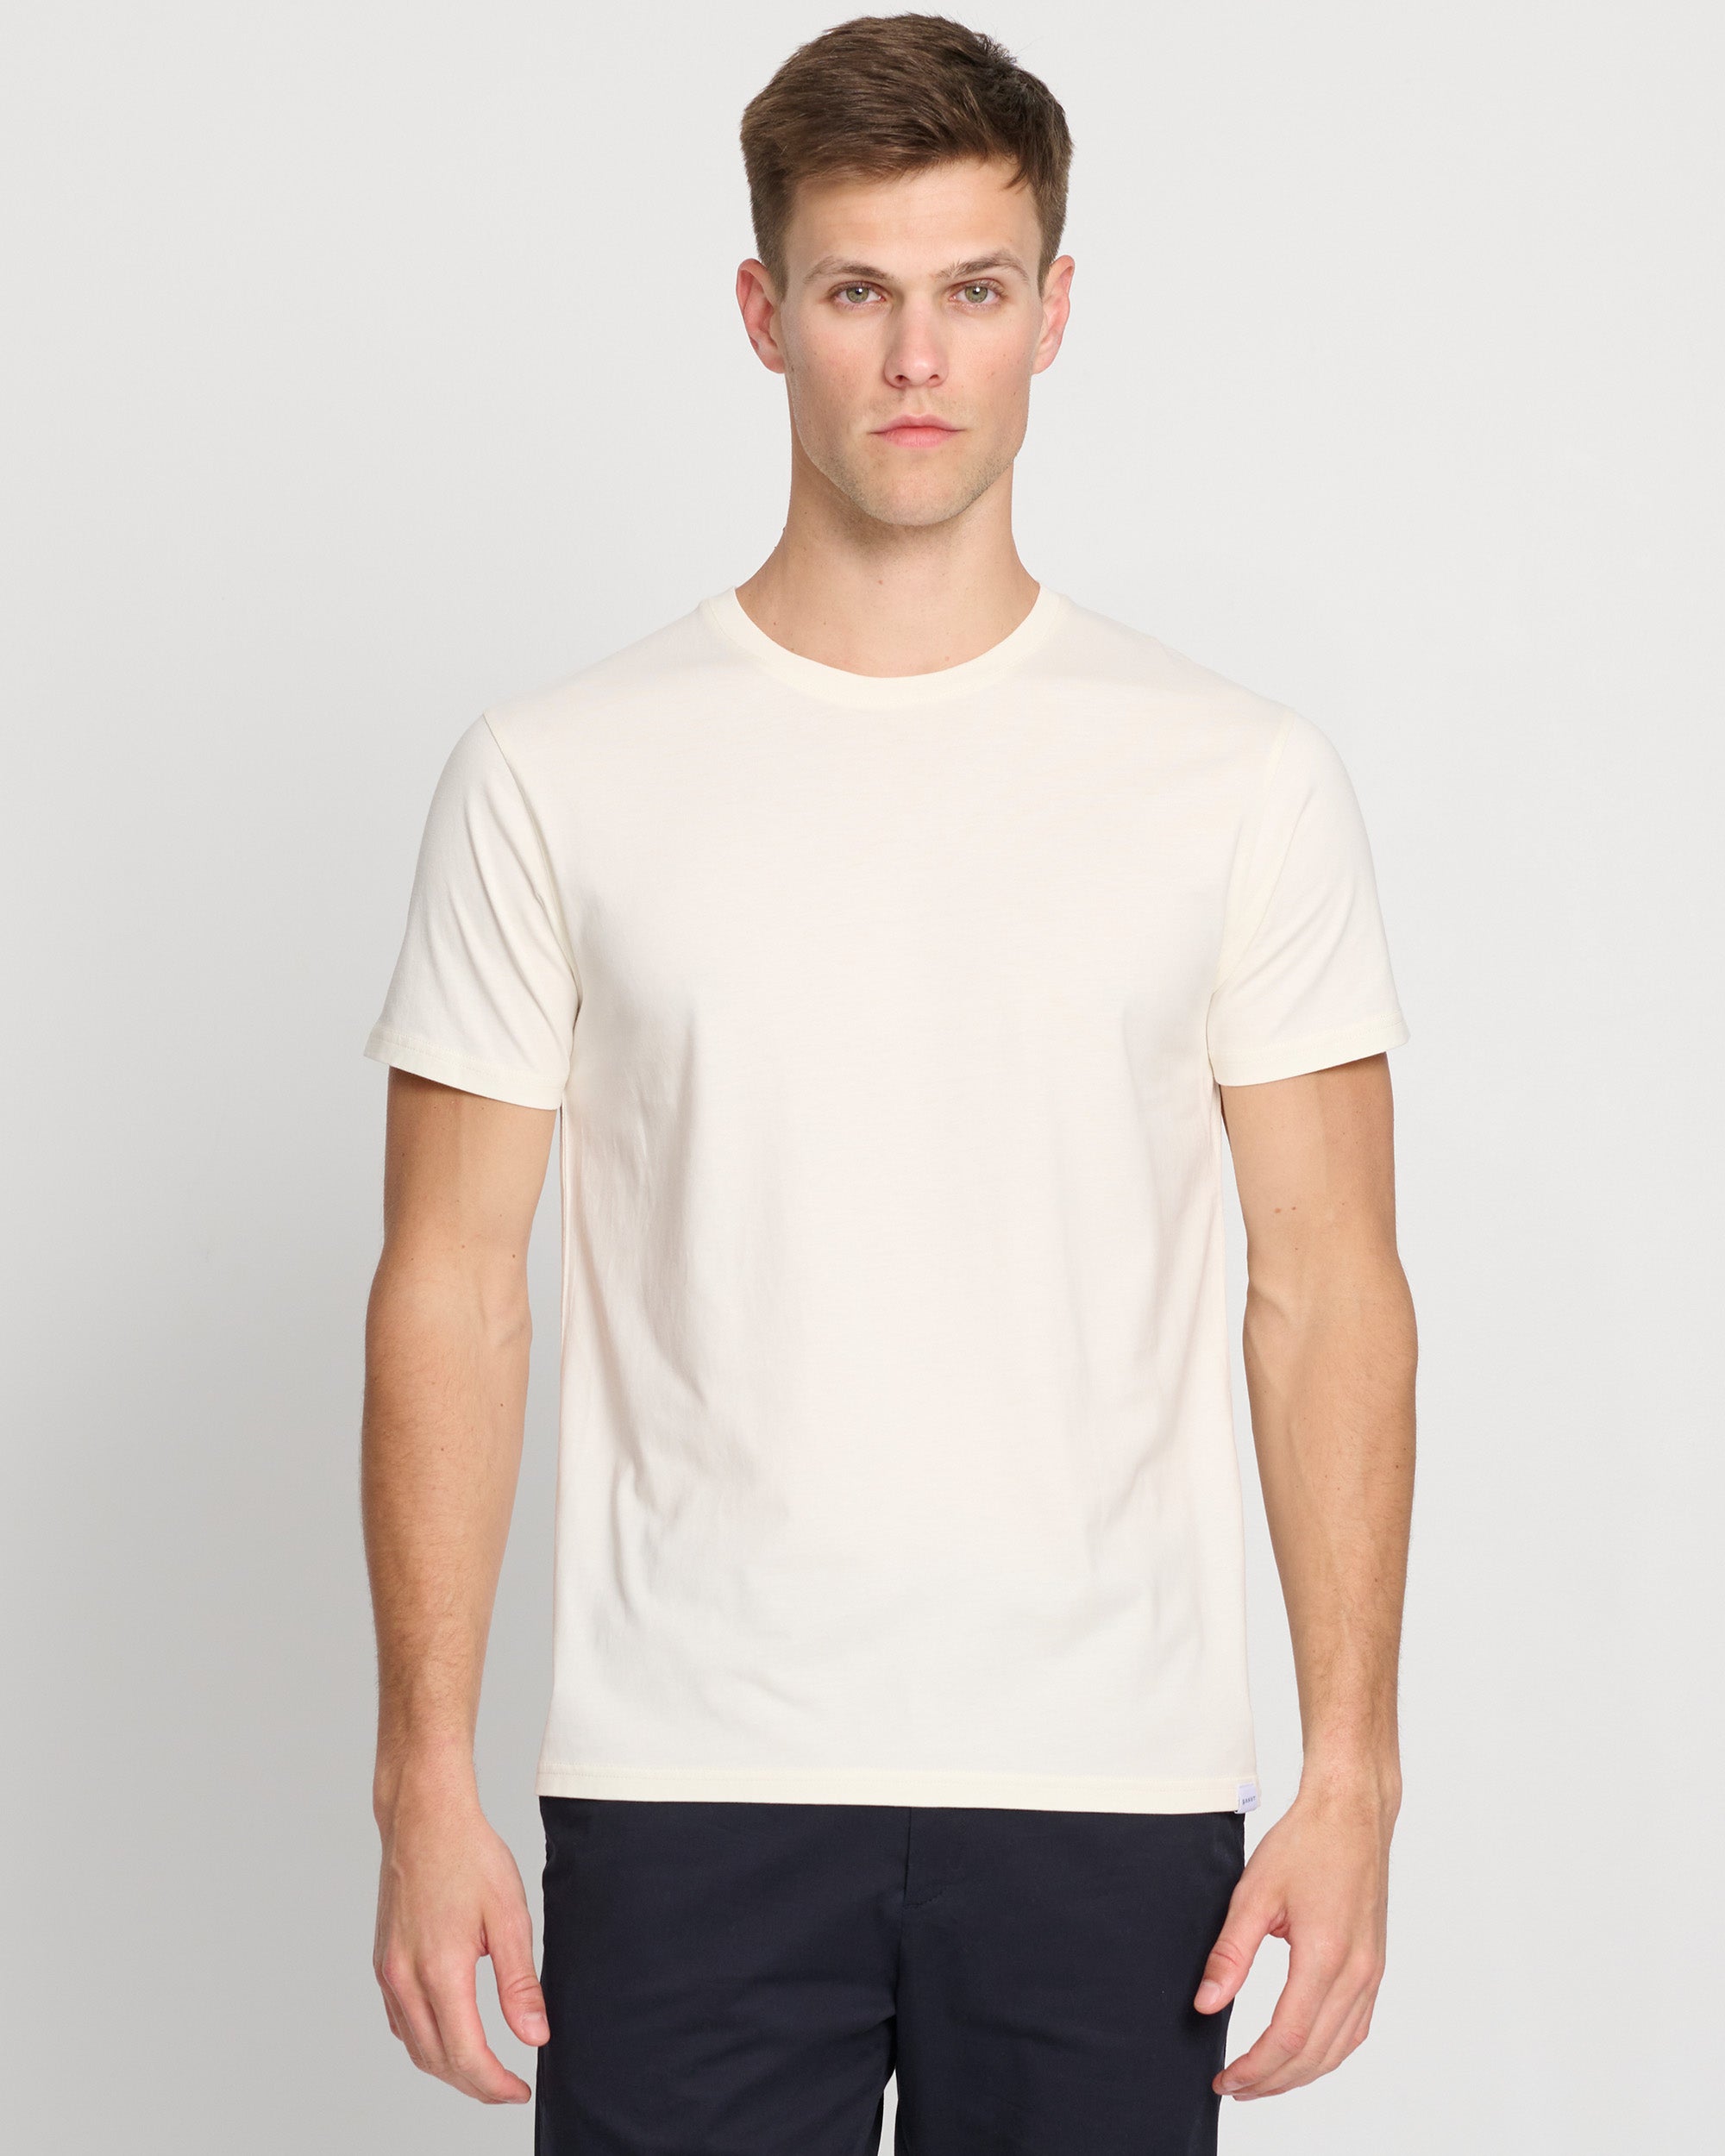 The Perfect Off-White T-Shirt for Men | Premium 185GSM Cotton